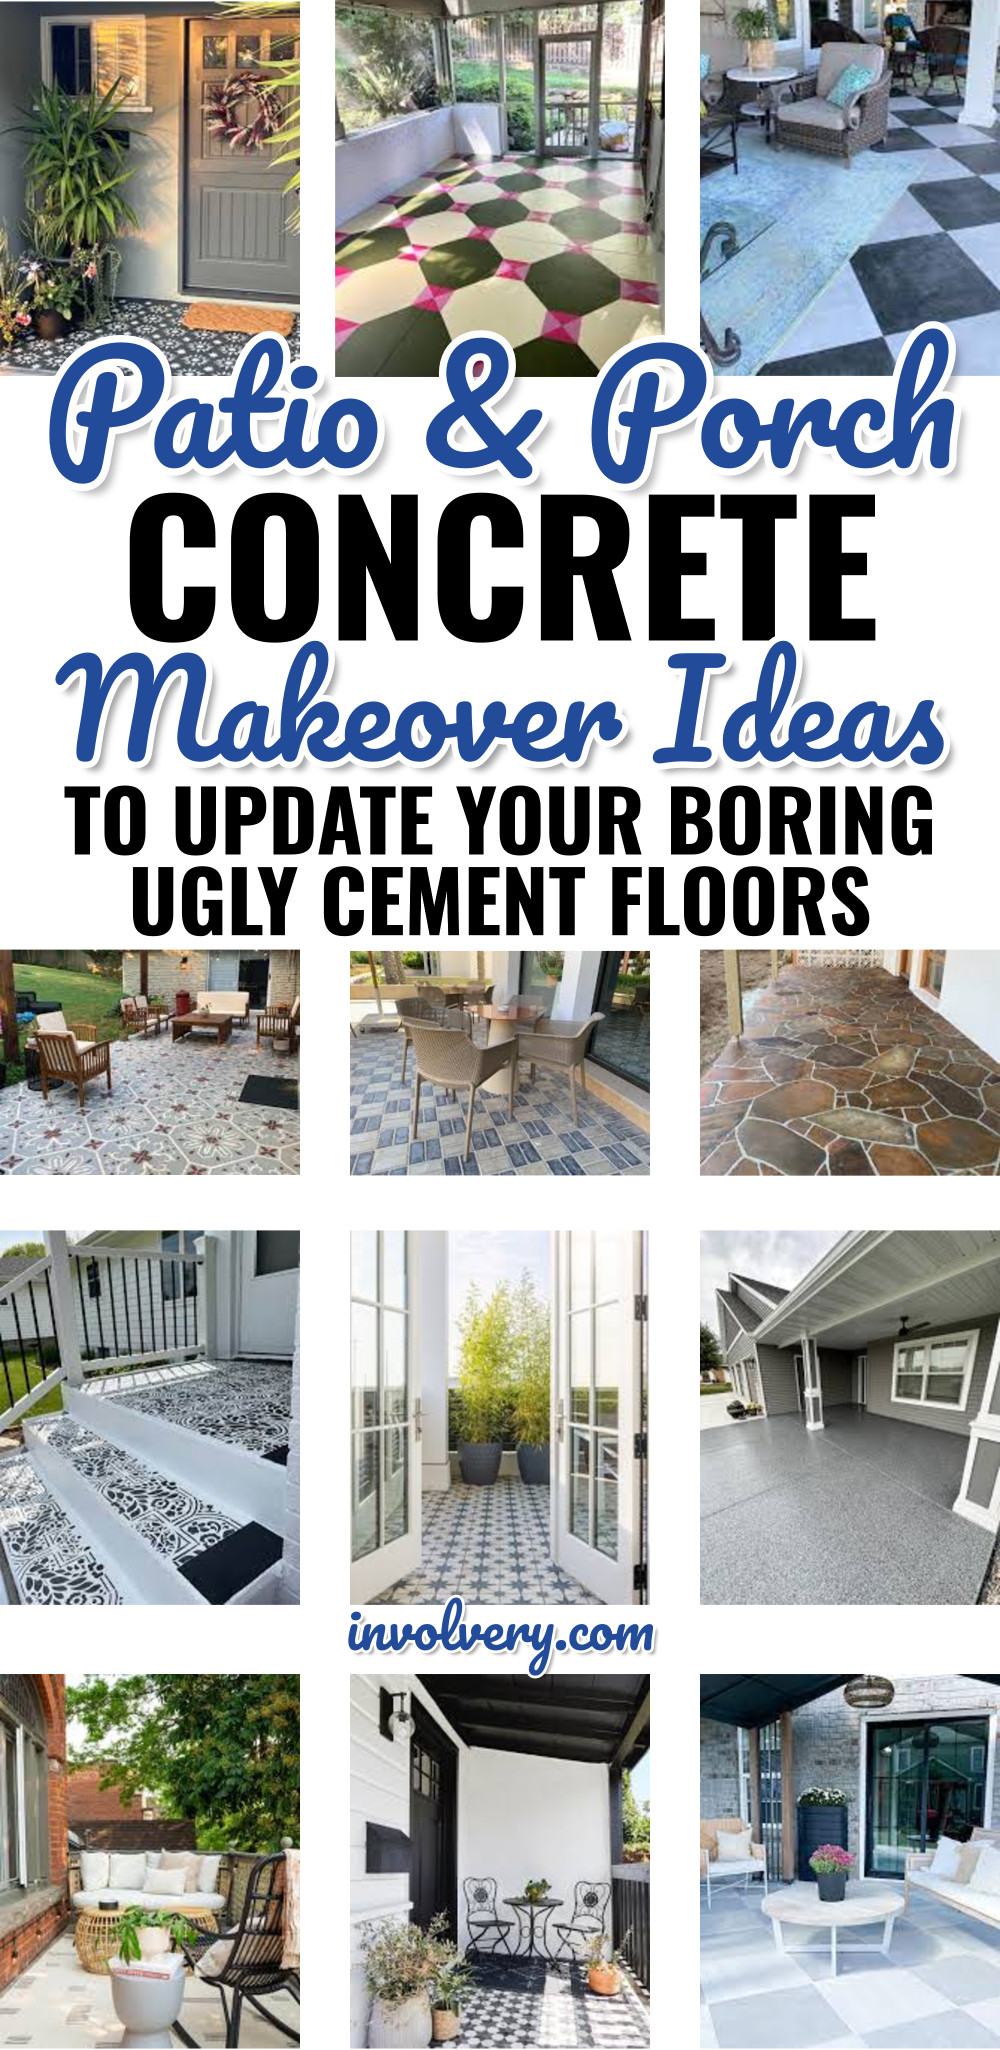 Patio and Porch Concrete Makeover Ideas, Tips & Before/After Pictures